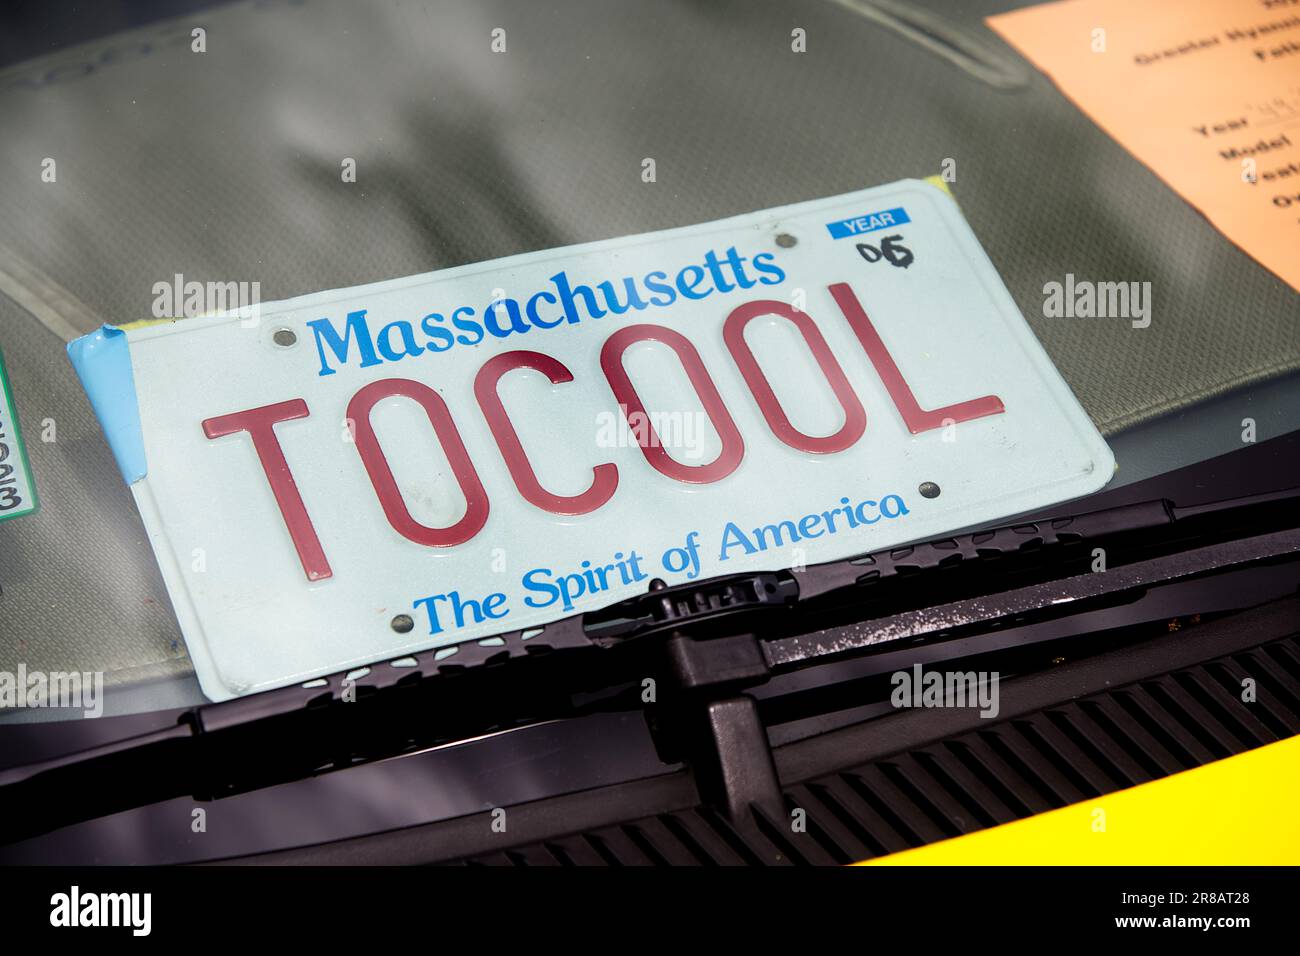 Father's Day Auto Show - Hyannis, Massachusetts, Cape Cod - USA. A Massachusetts license plate on the dashboard of an automobile on display. Stock Photo